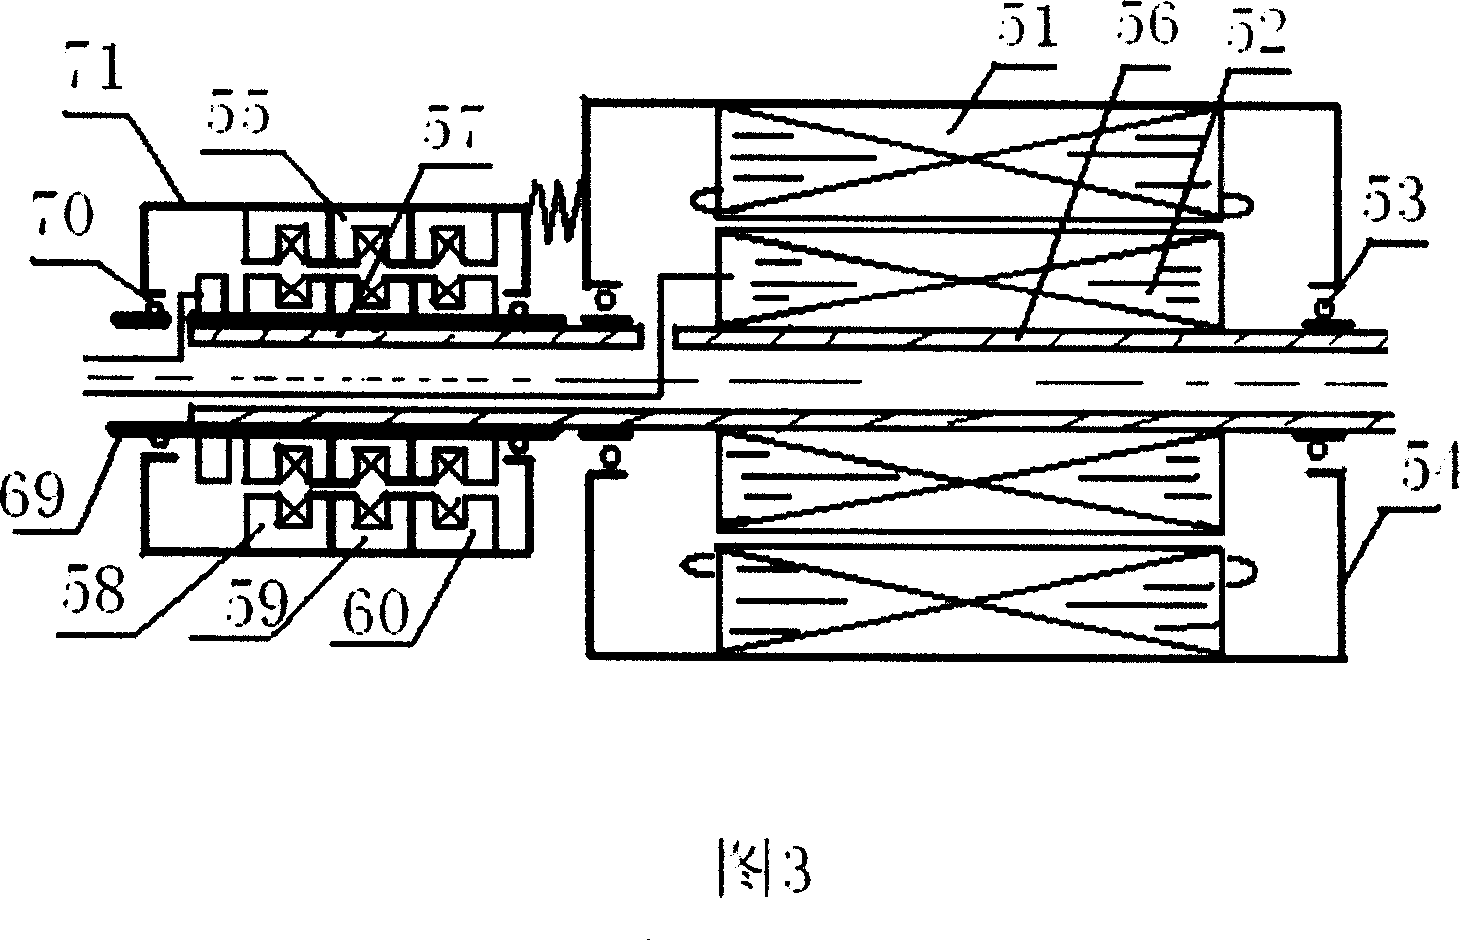 Alternating current synchronous motor based on three-phase rotary transformer technology, alternating current wound rotor motor and arrangements for speed regulation